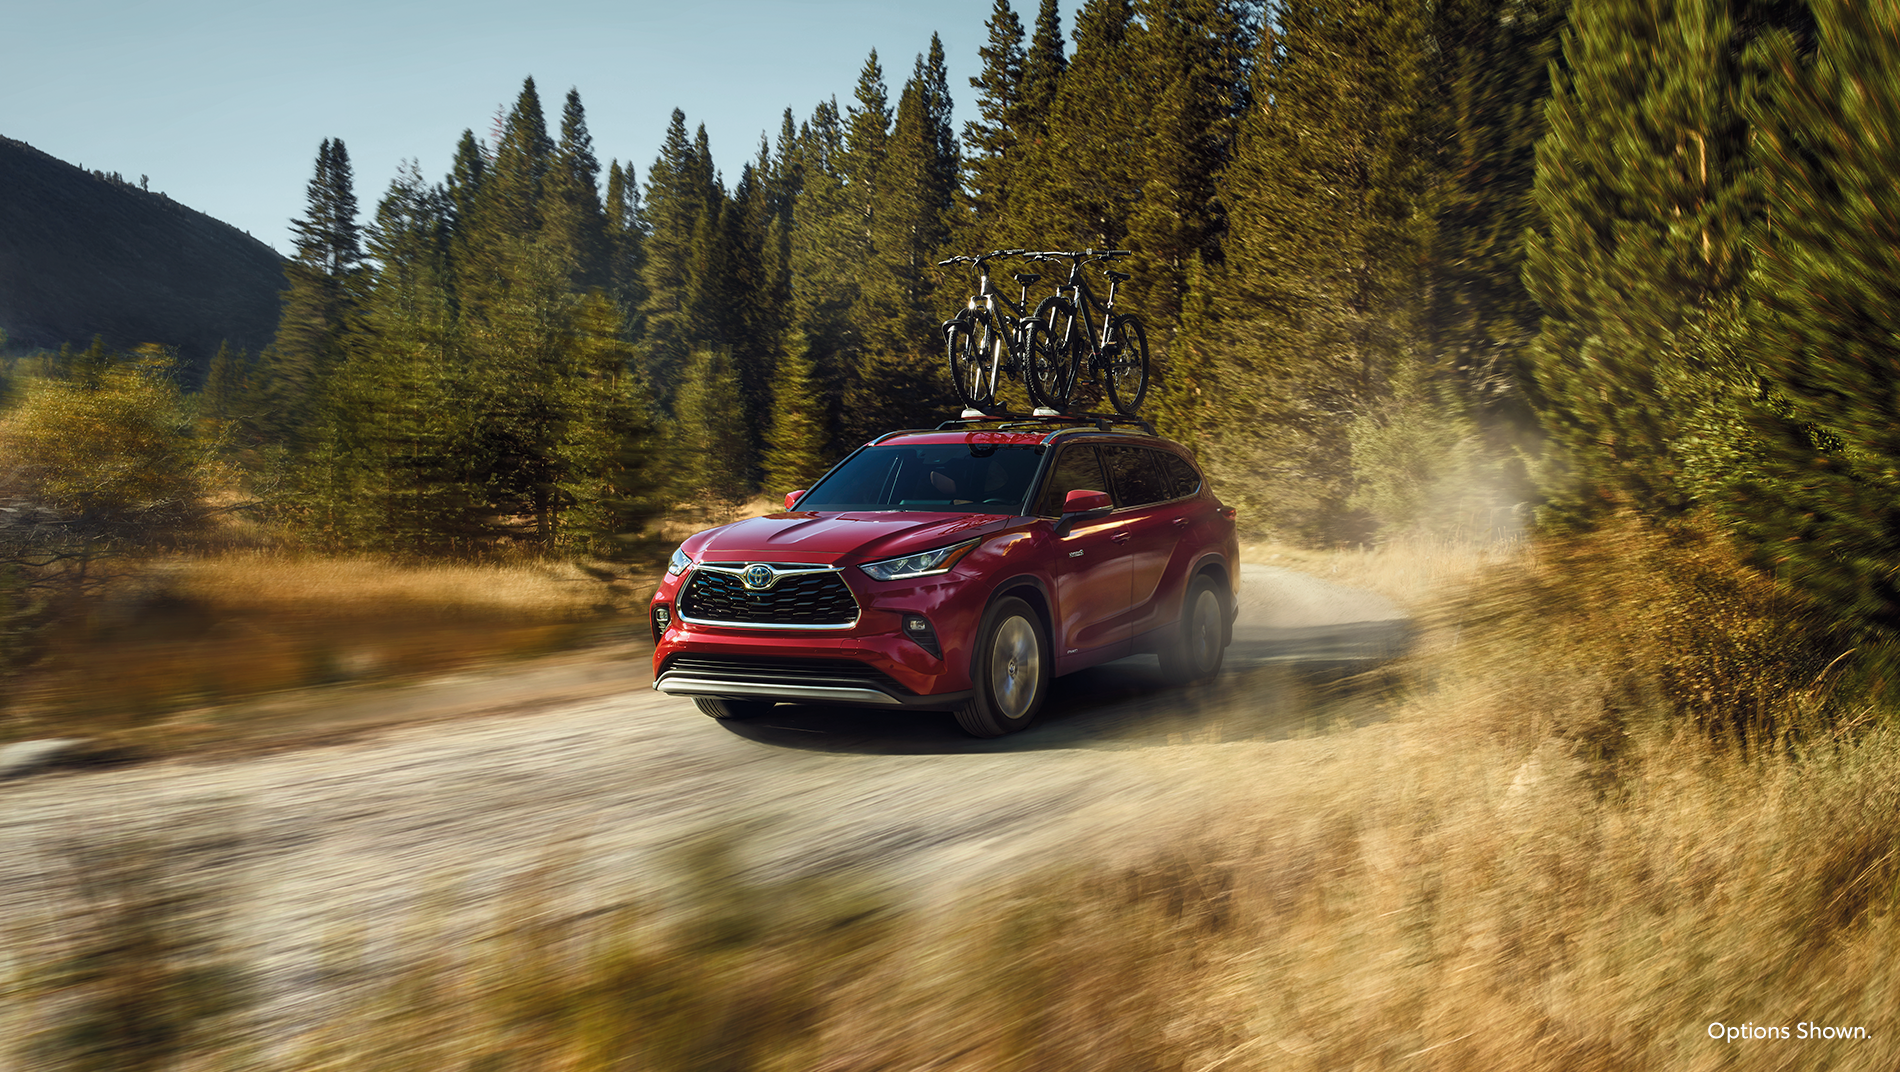 Red Toyota Highlander Hybrid SUV with roof rack holding bicycles drives down a dusty mountain road surrounded by evergreen trees